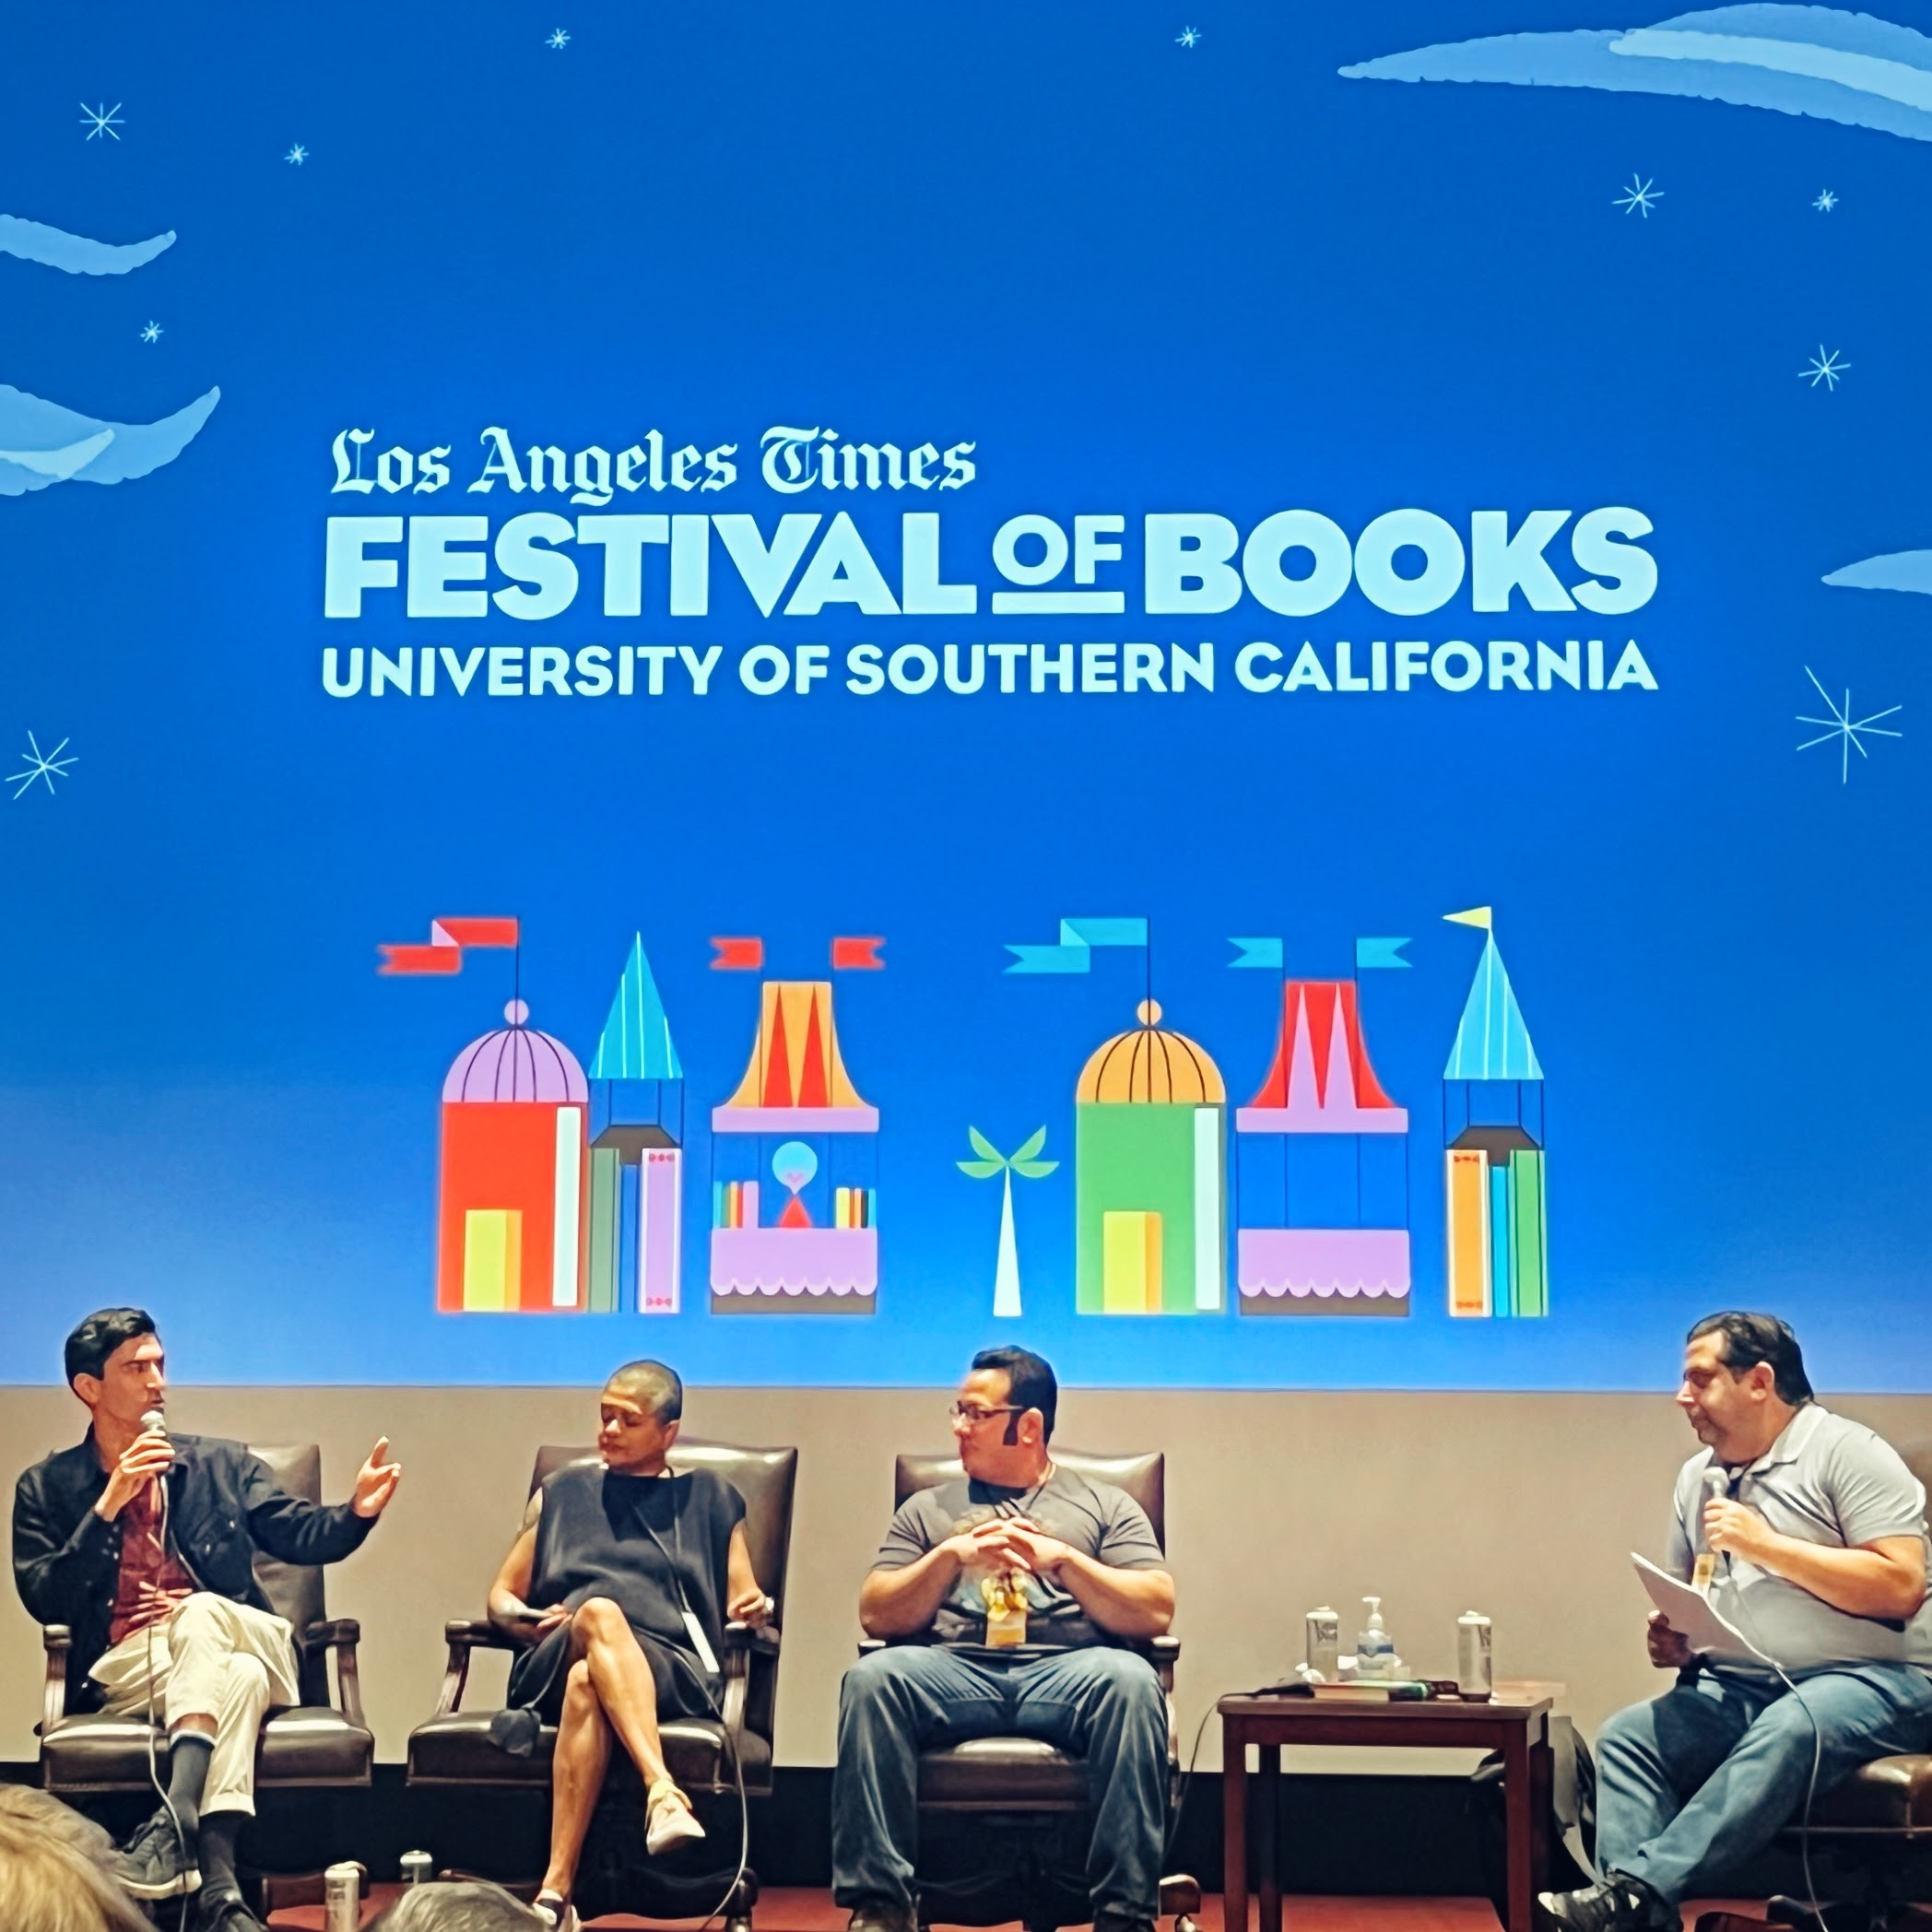 Daniel Nieh speaking on a panel at the Los Angeles Times Festival of Books at the University of Southern California